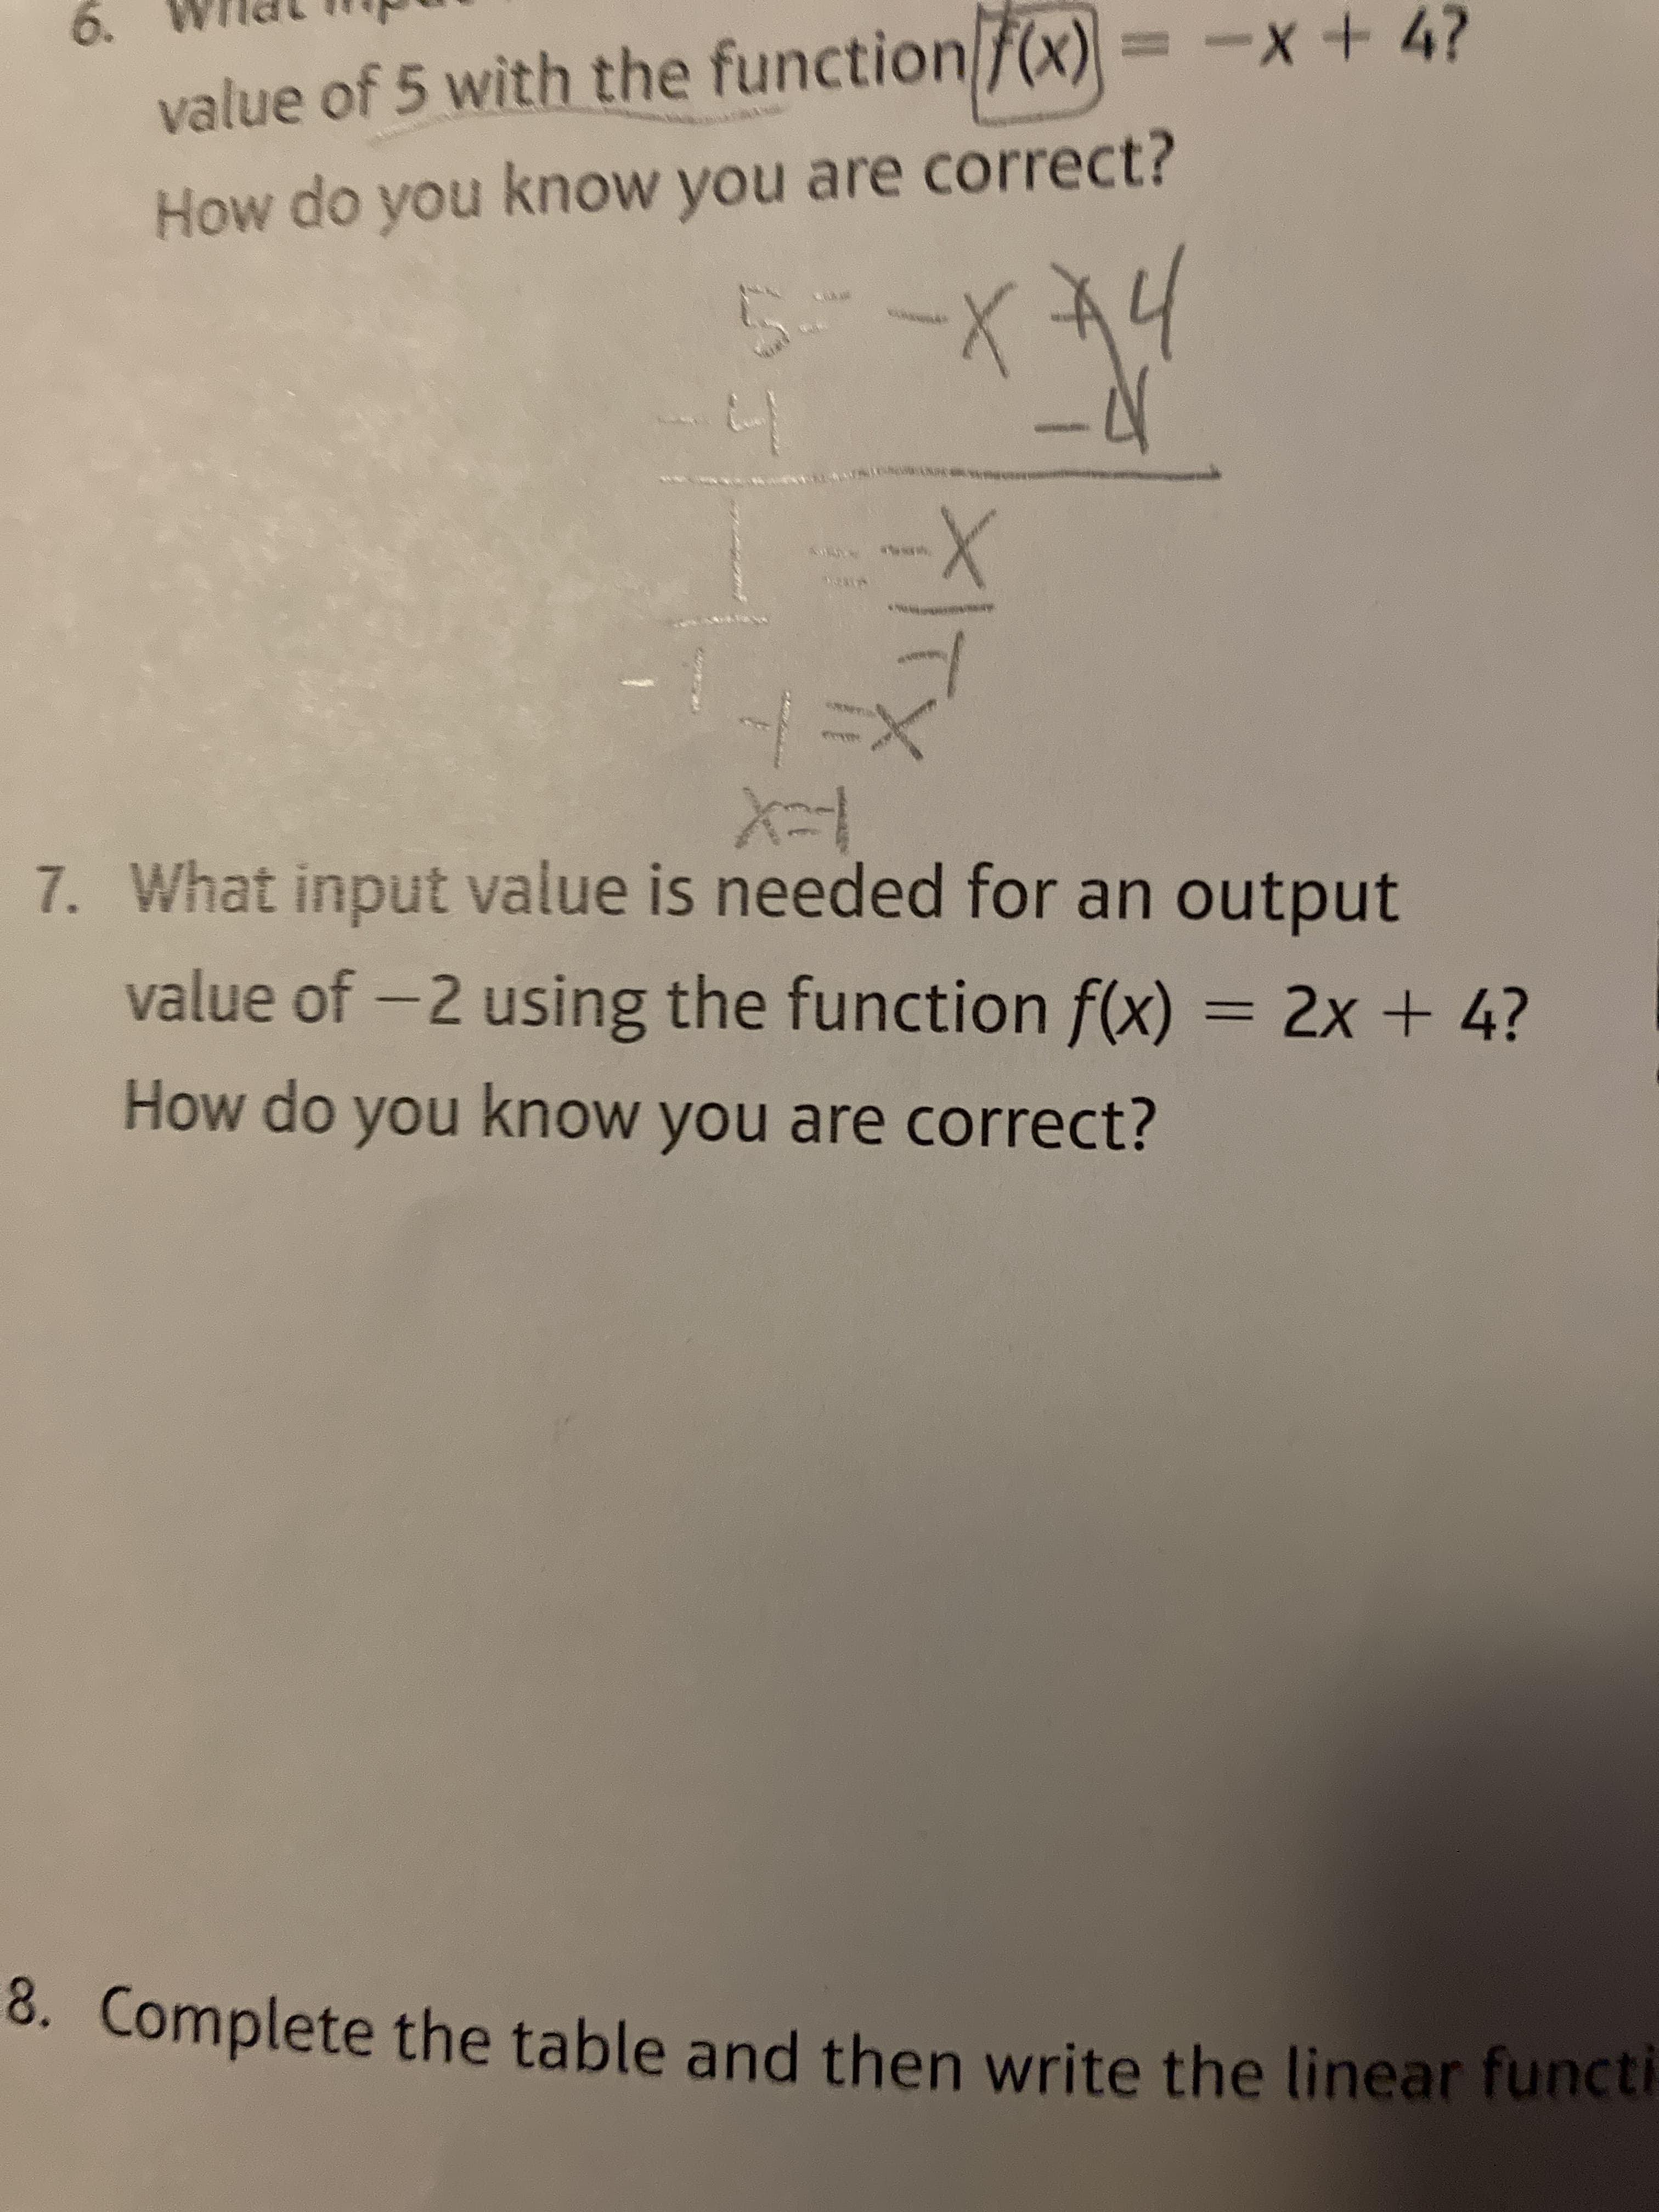 ITX
6.
value of 5 with the function f(x)
+ X-
How do you know you are correct?
ww.w
7. What input value is needed for an output
value of -2 using the function f(x) = 2x + 4?
How do you know you are correct?
8. Complete the table and then write the linear functi
